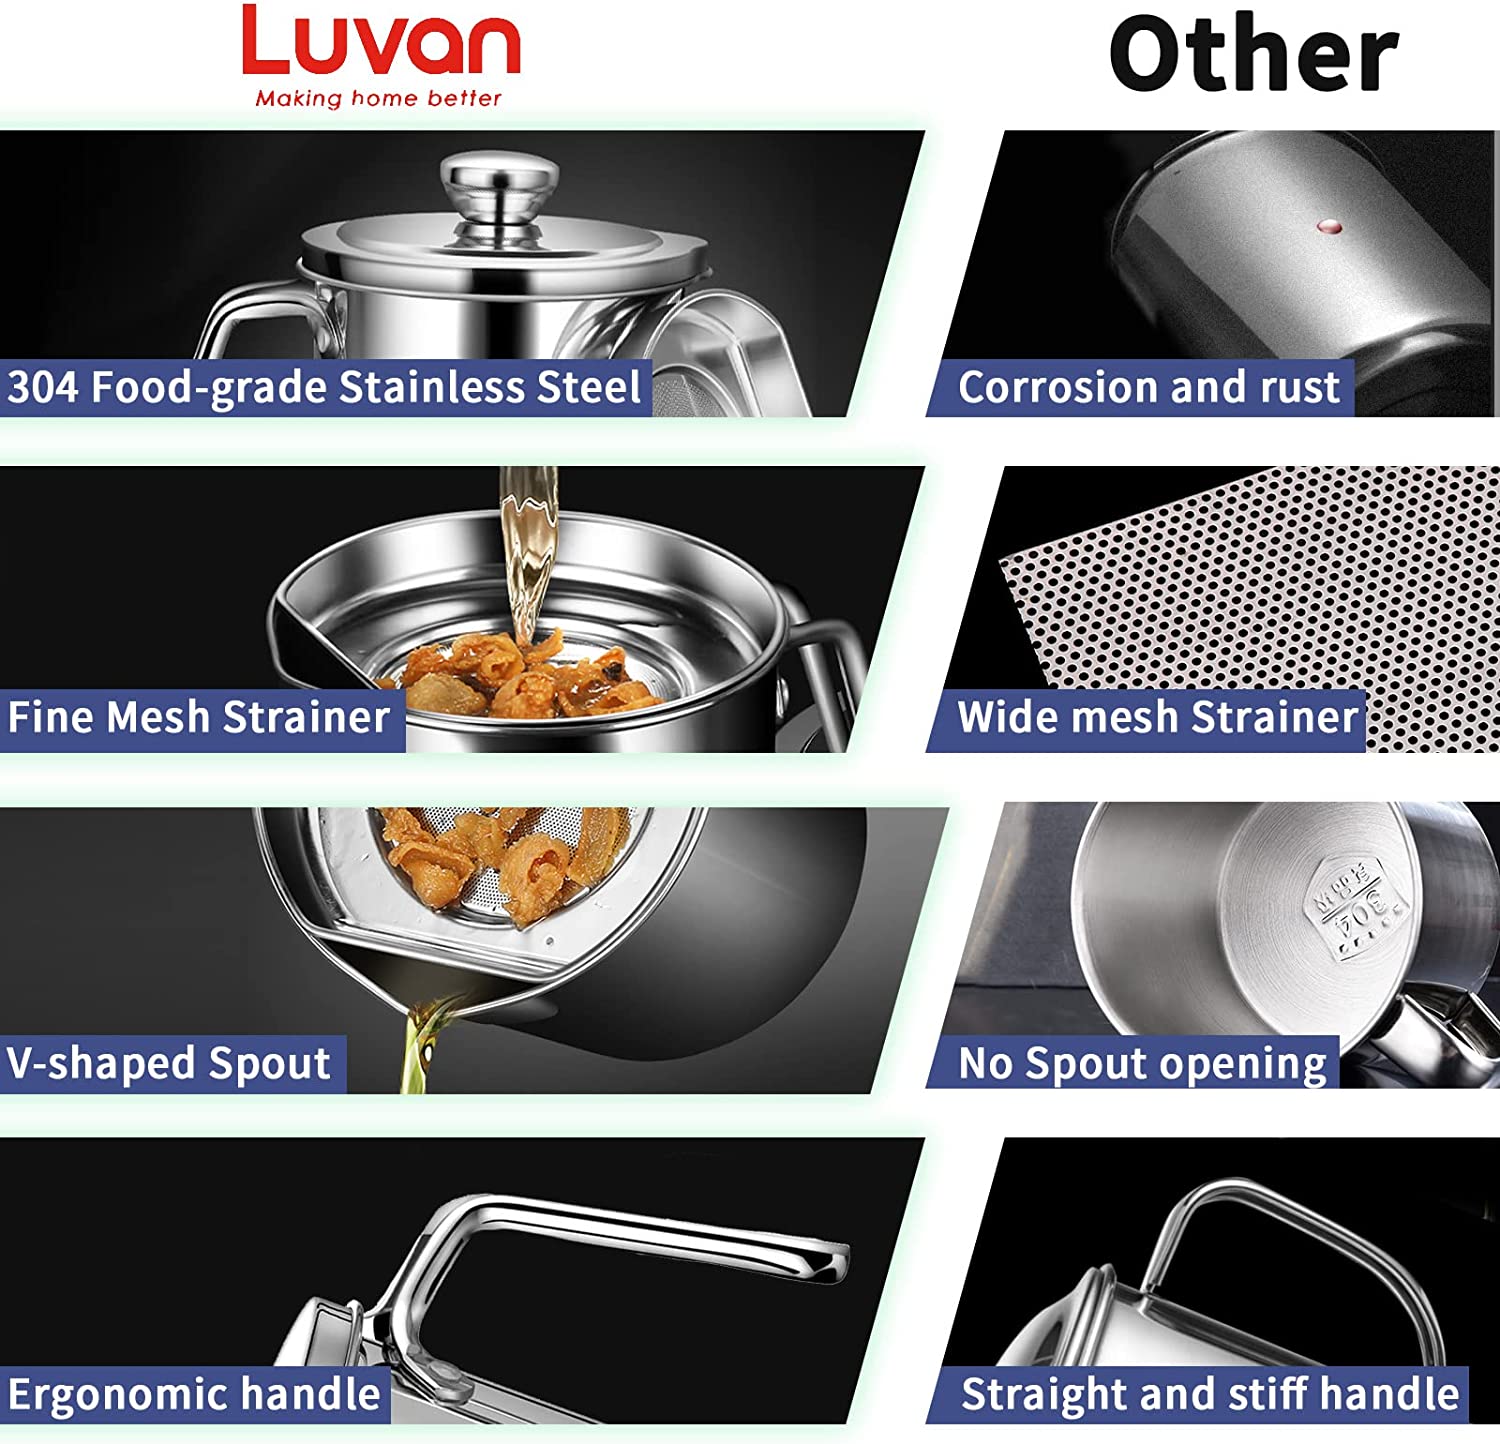  Luvan 8Cup/2L/68oz Bacon Grease Container with Strainer,  Cooking Oil Container, Stainless Steel Oil Filter Pot with Strainer,  Dustproof Lid and Coaster Tray, Ideal for Storing Hot Frying Oil,Fat ect:  Home 